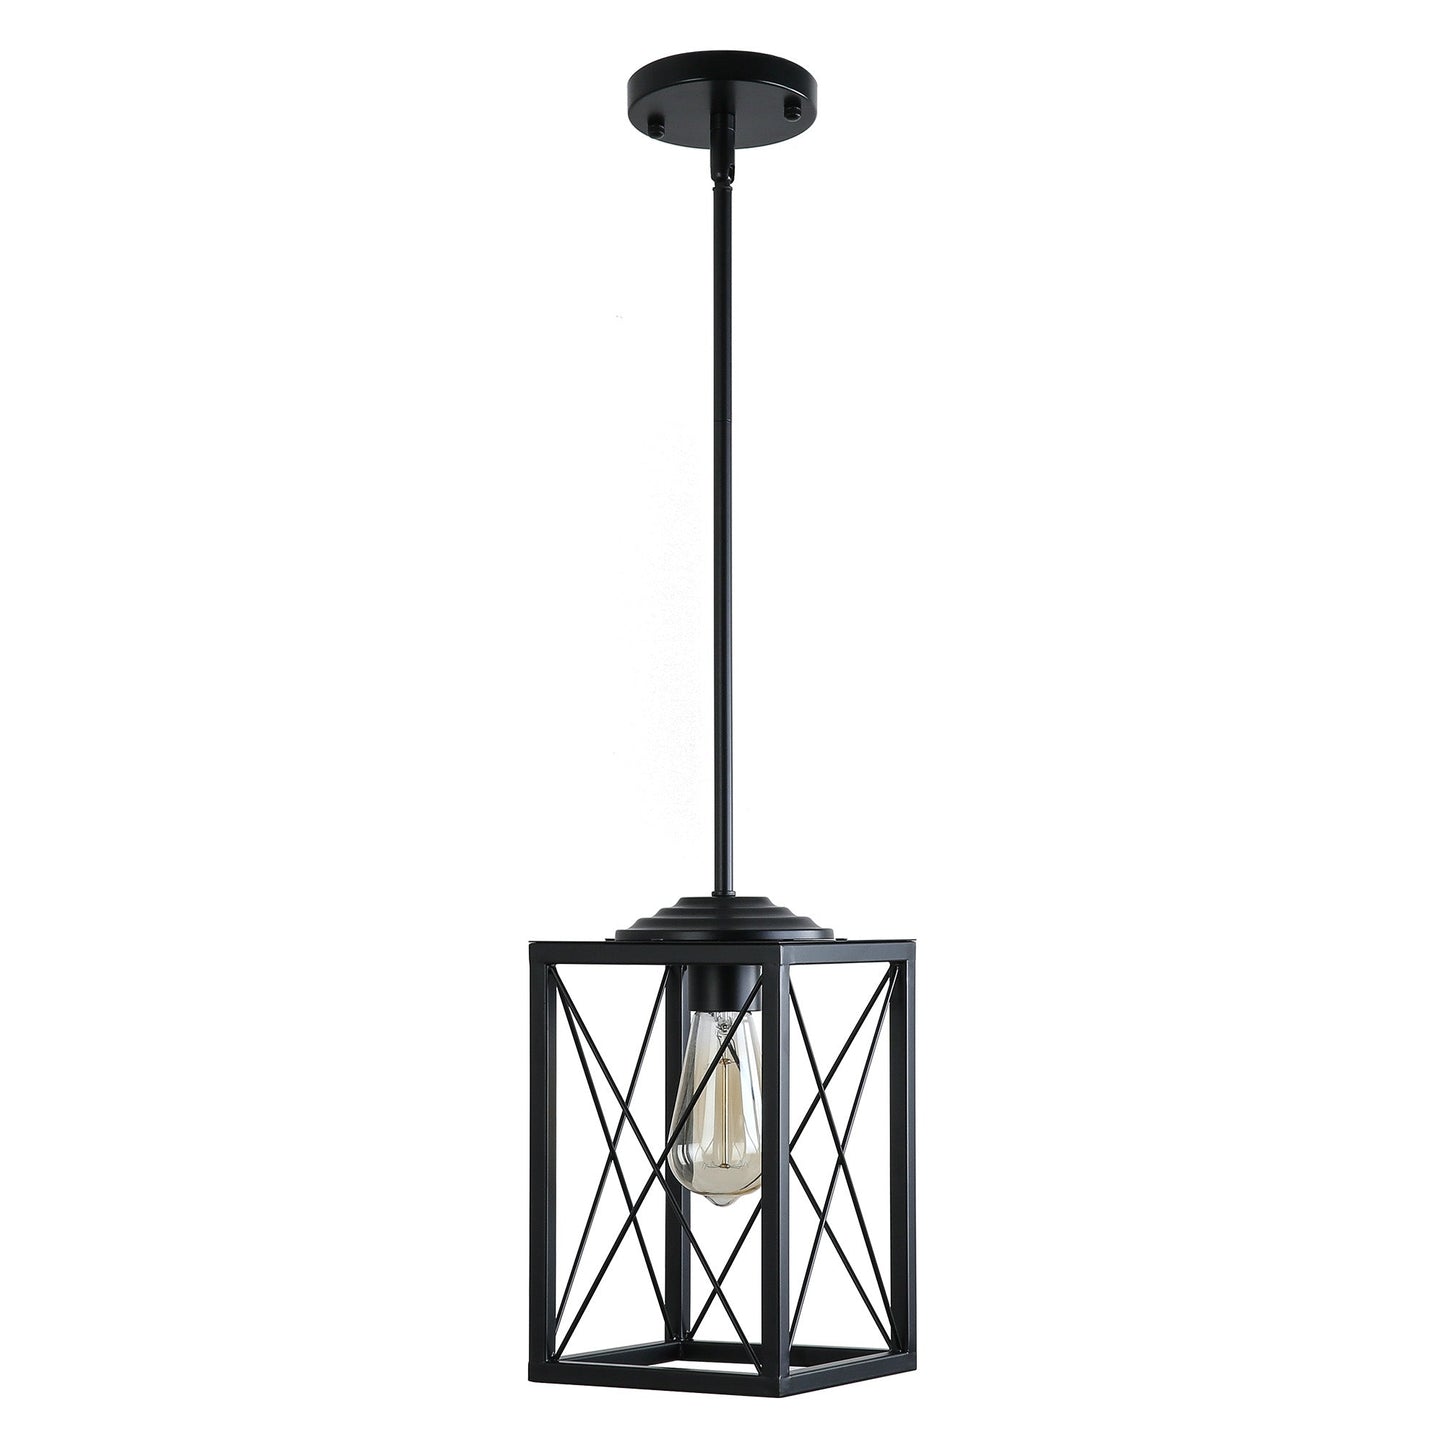 1 Light, Industrial Style Ceiling Island Pendant Lighting, Matte Black, Bulb Not Included,1Pack